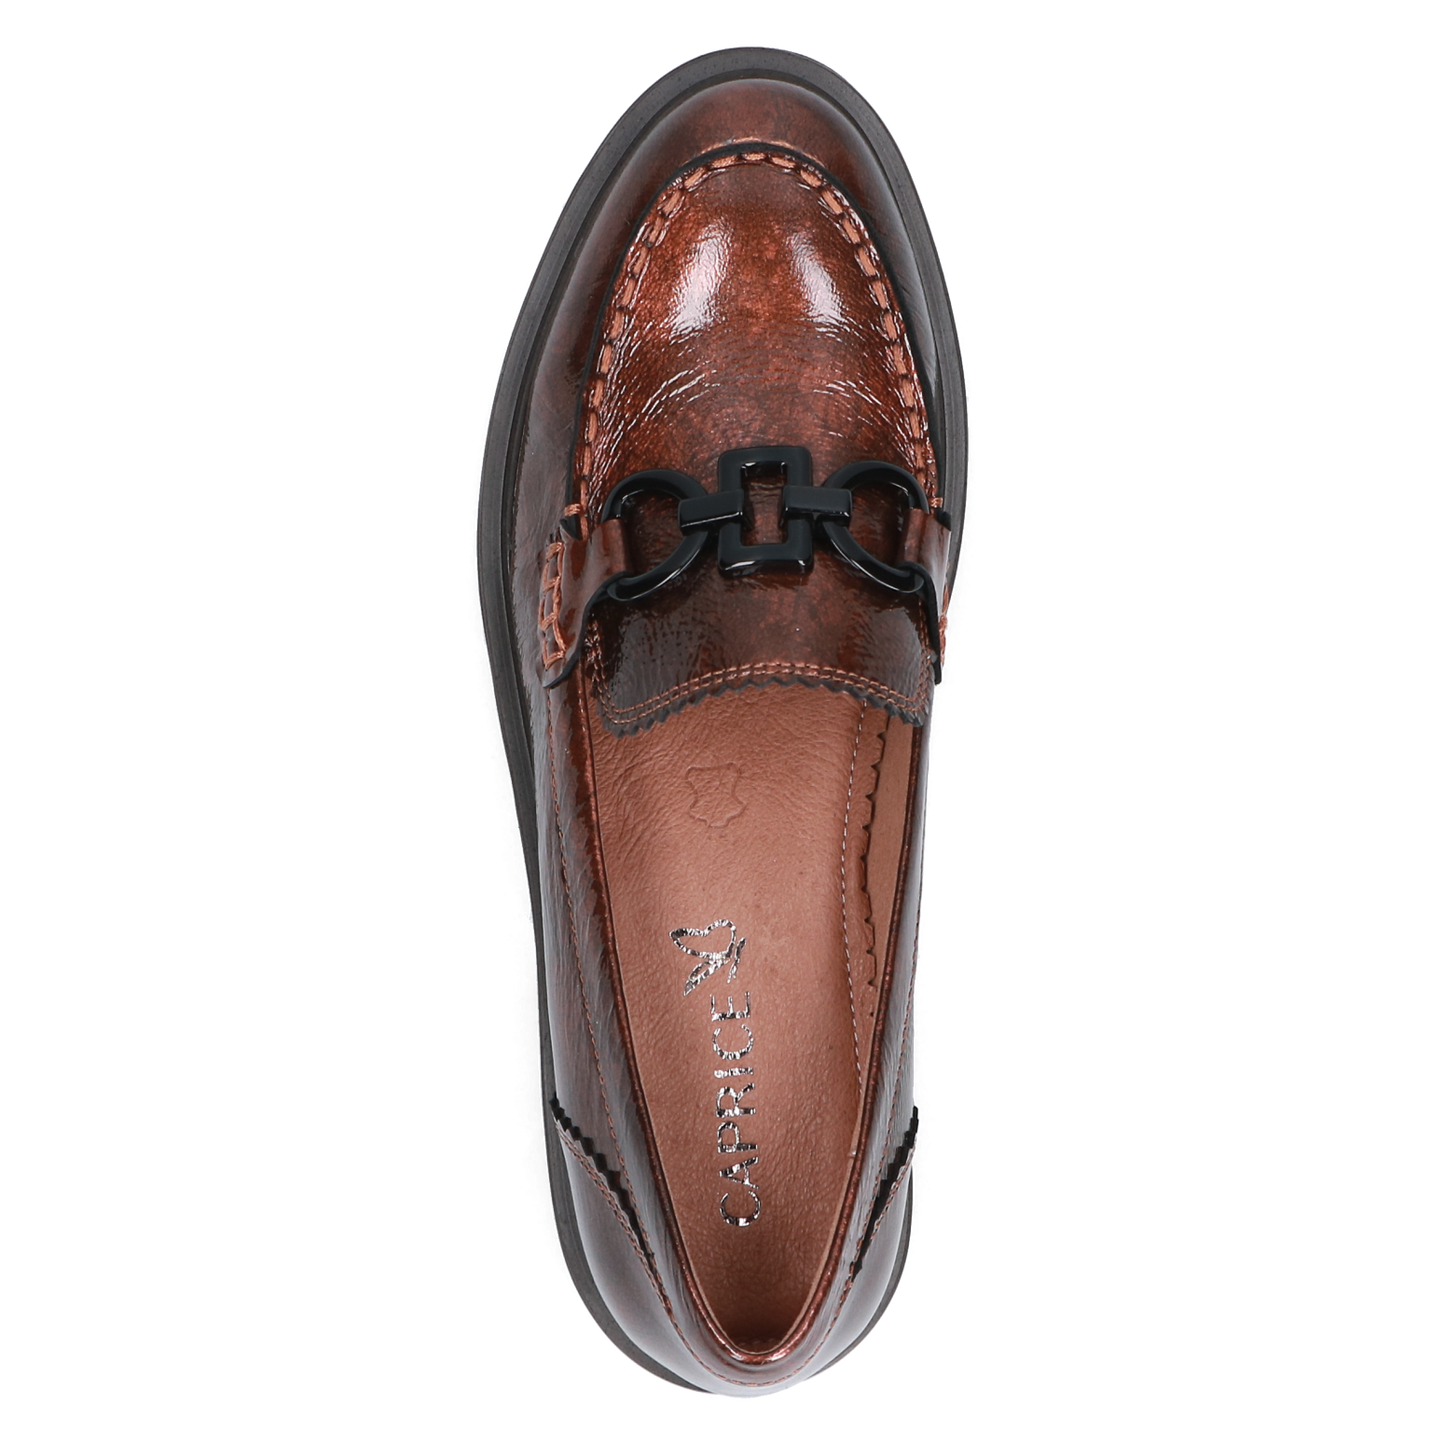 Caprice 9-9-24706-29 328 Rust Casual Shoes